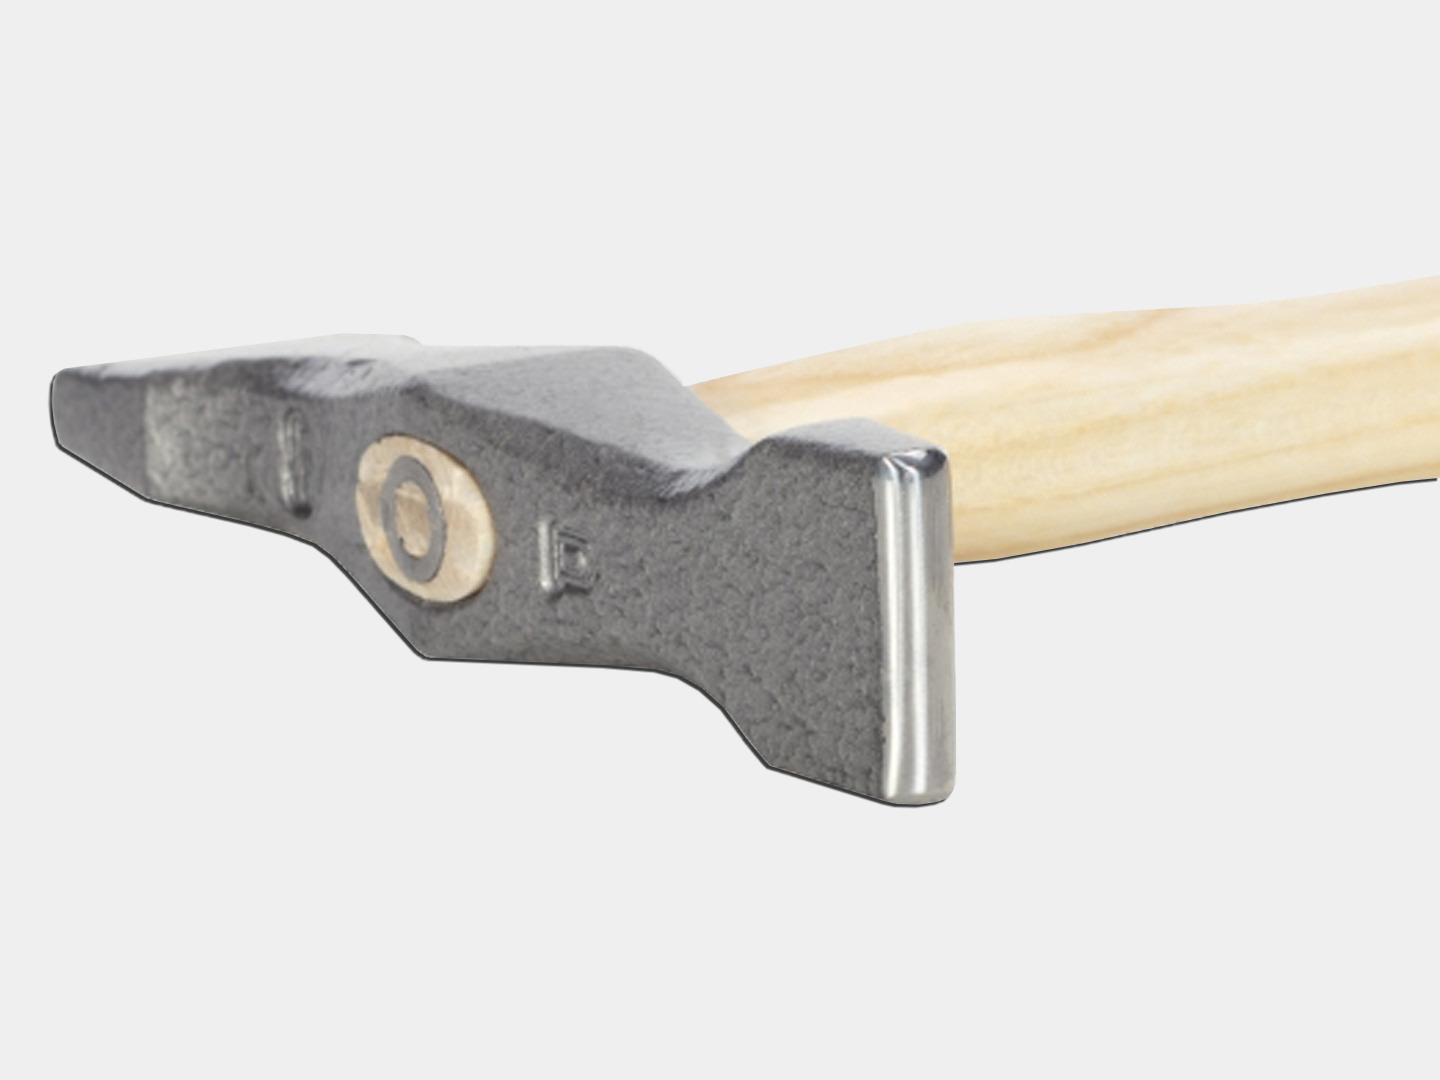 WUKO 1004951 - Picard Sheet Metal Hammer with Hickory Handle